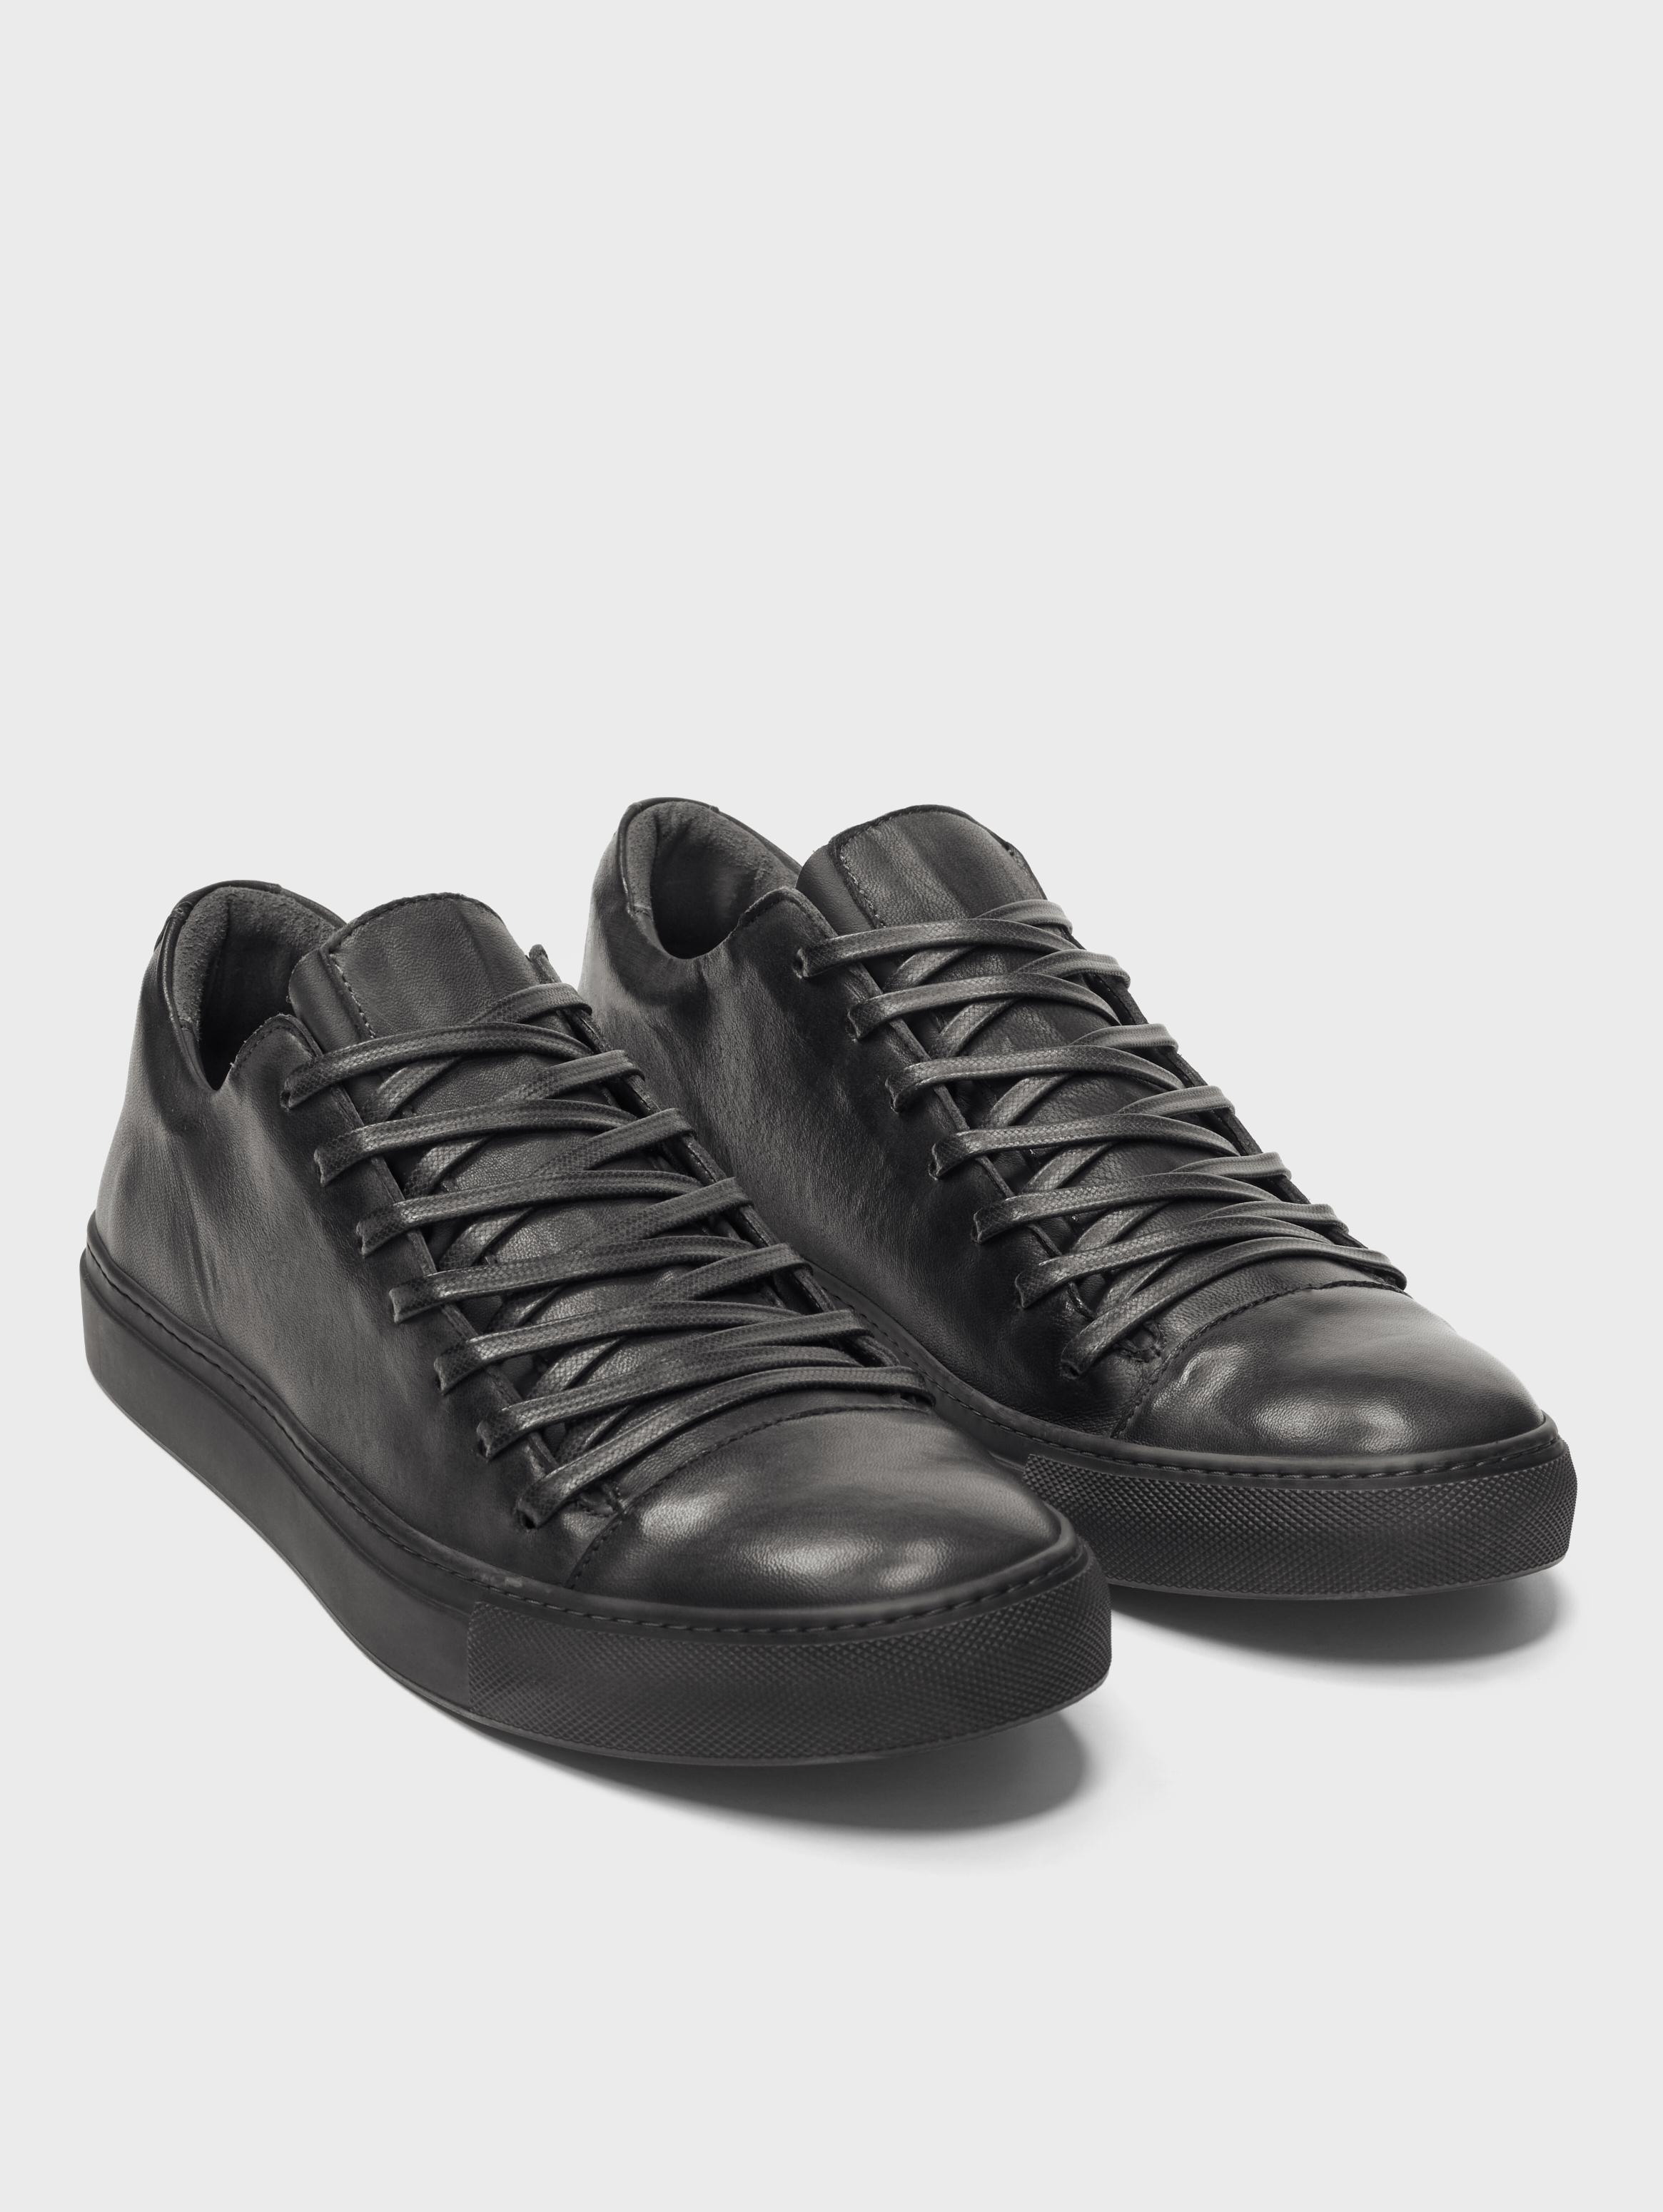 sneakers leather black